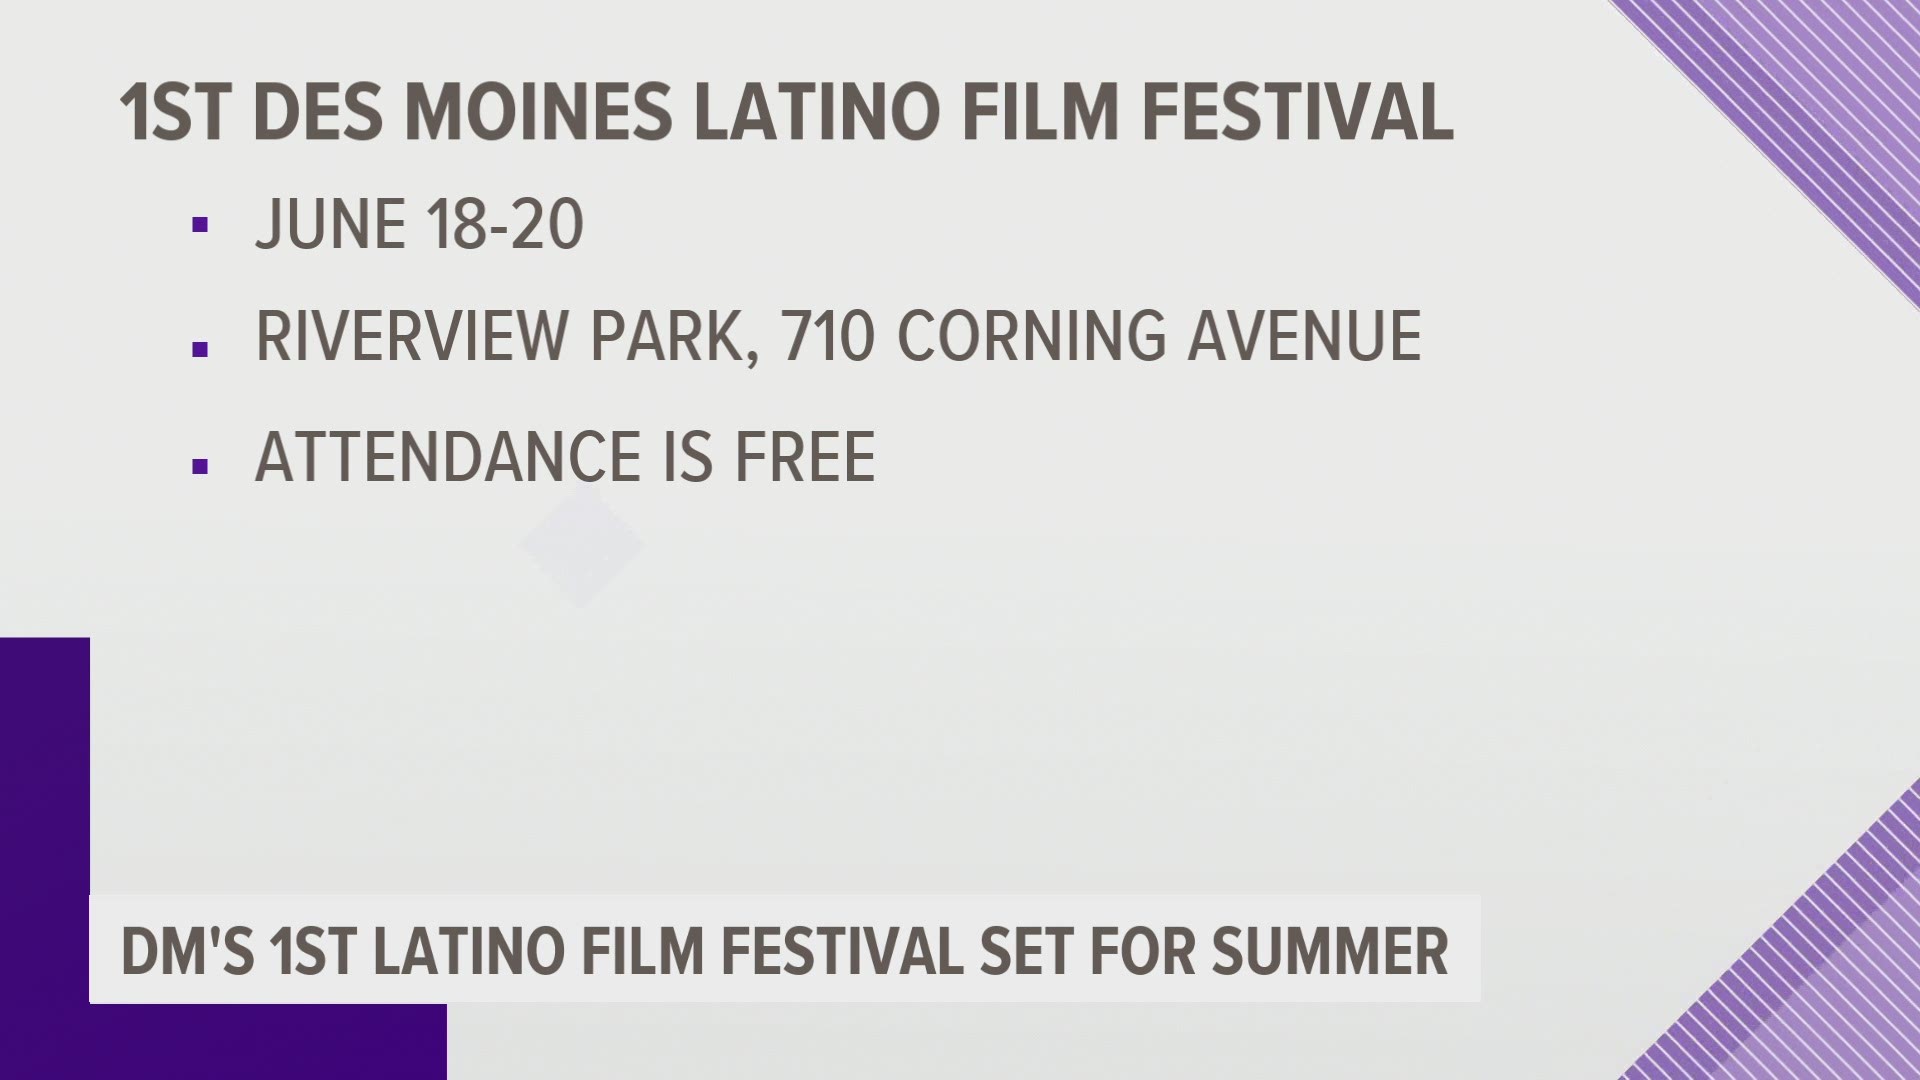 The Des Moines Latino Film Festival has three goals for its debut this summer.